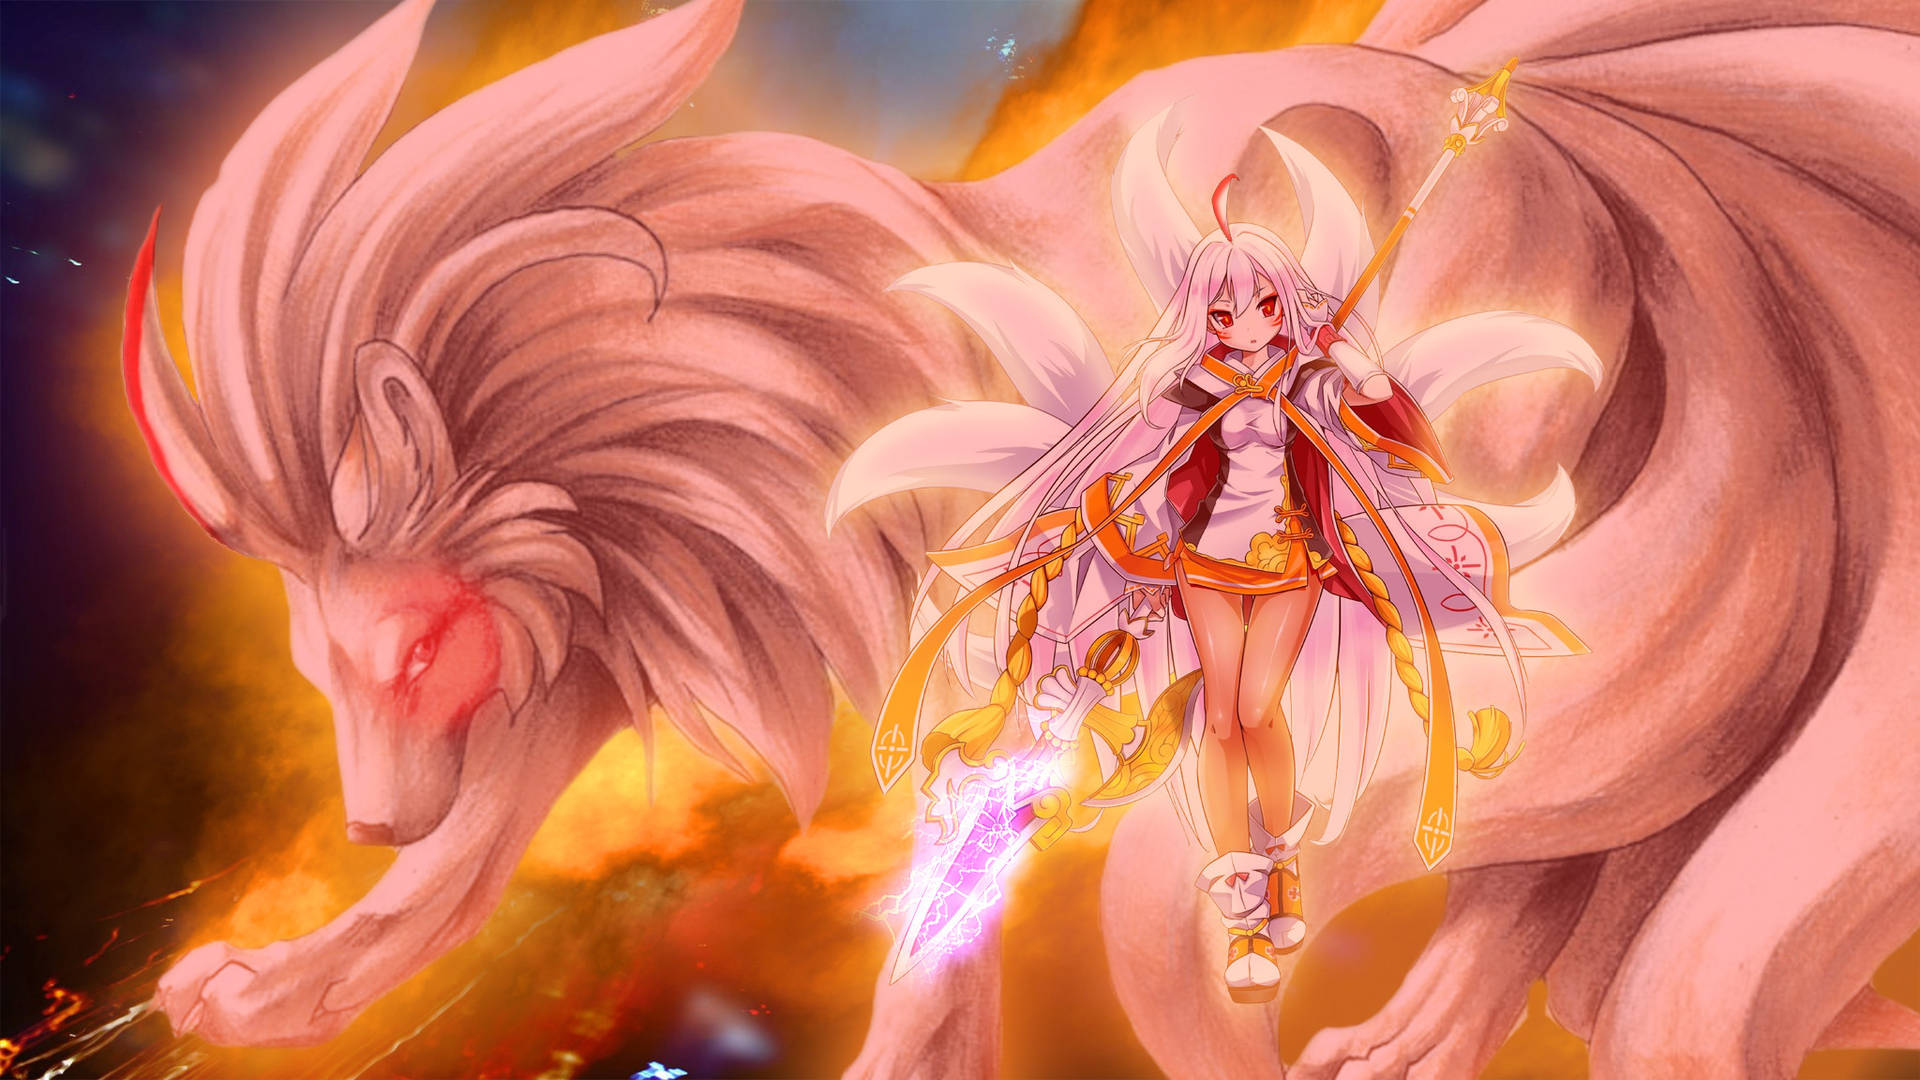 Mysterious Nine-Tailed Fox in Human Form Wallpaper